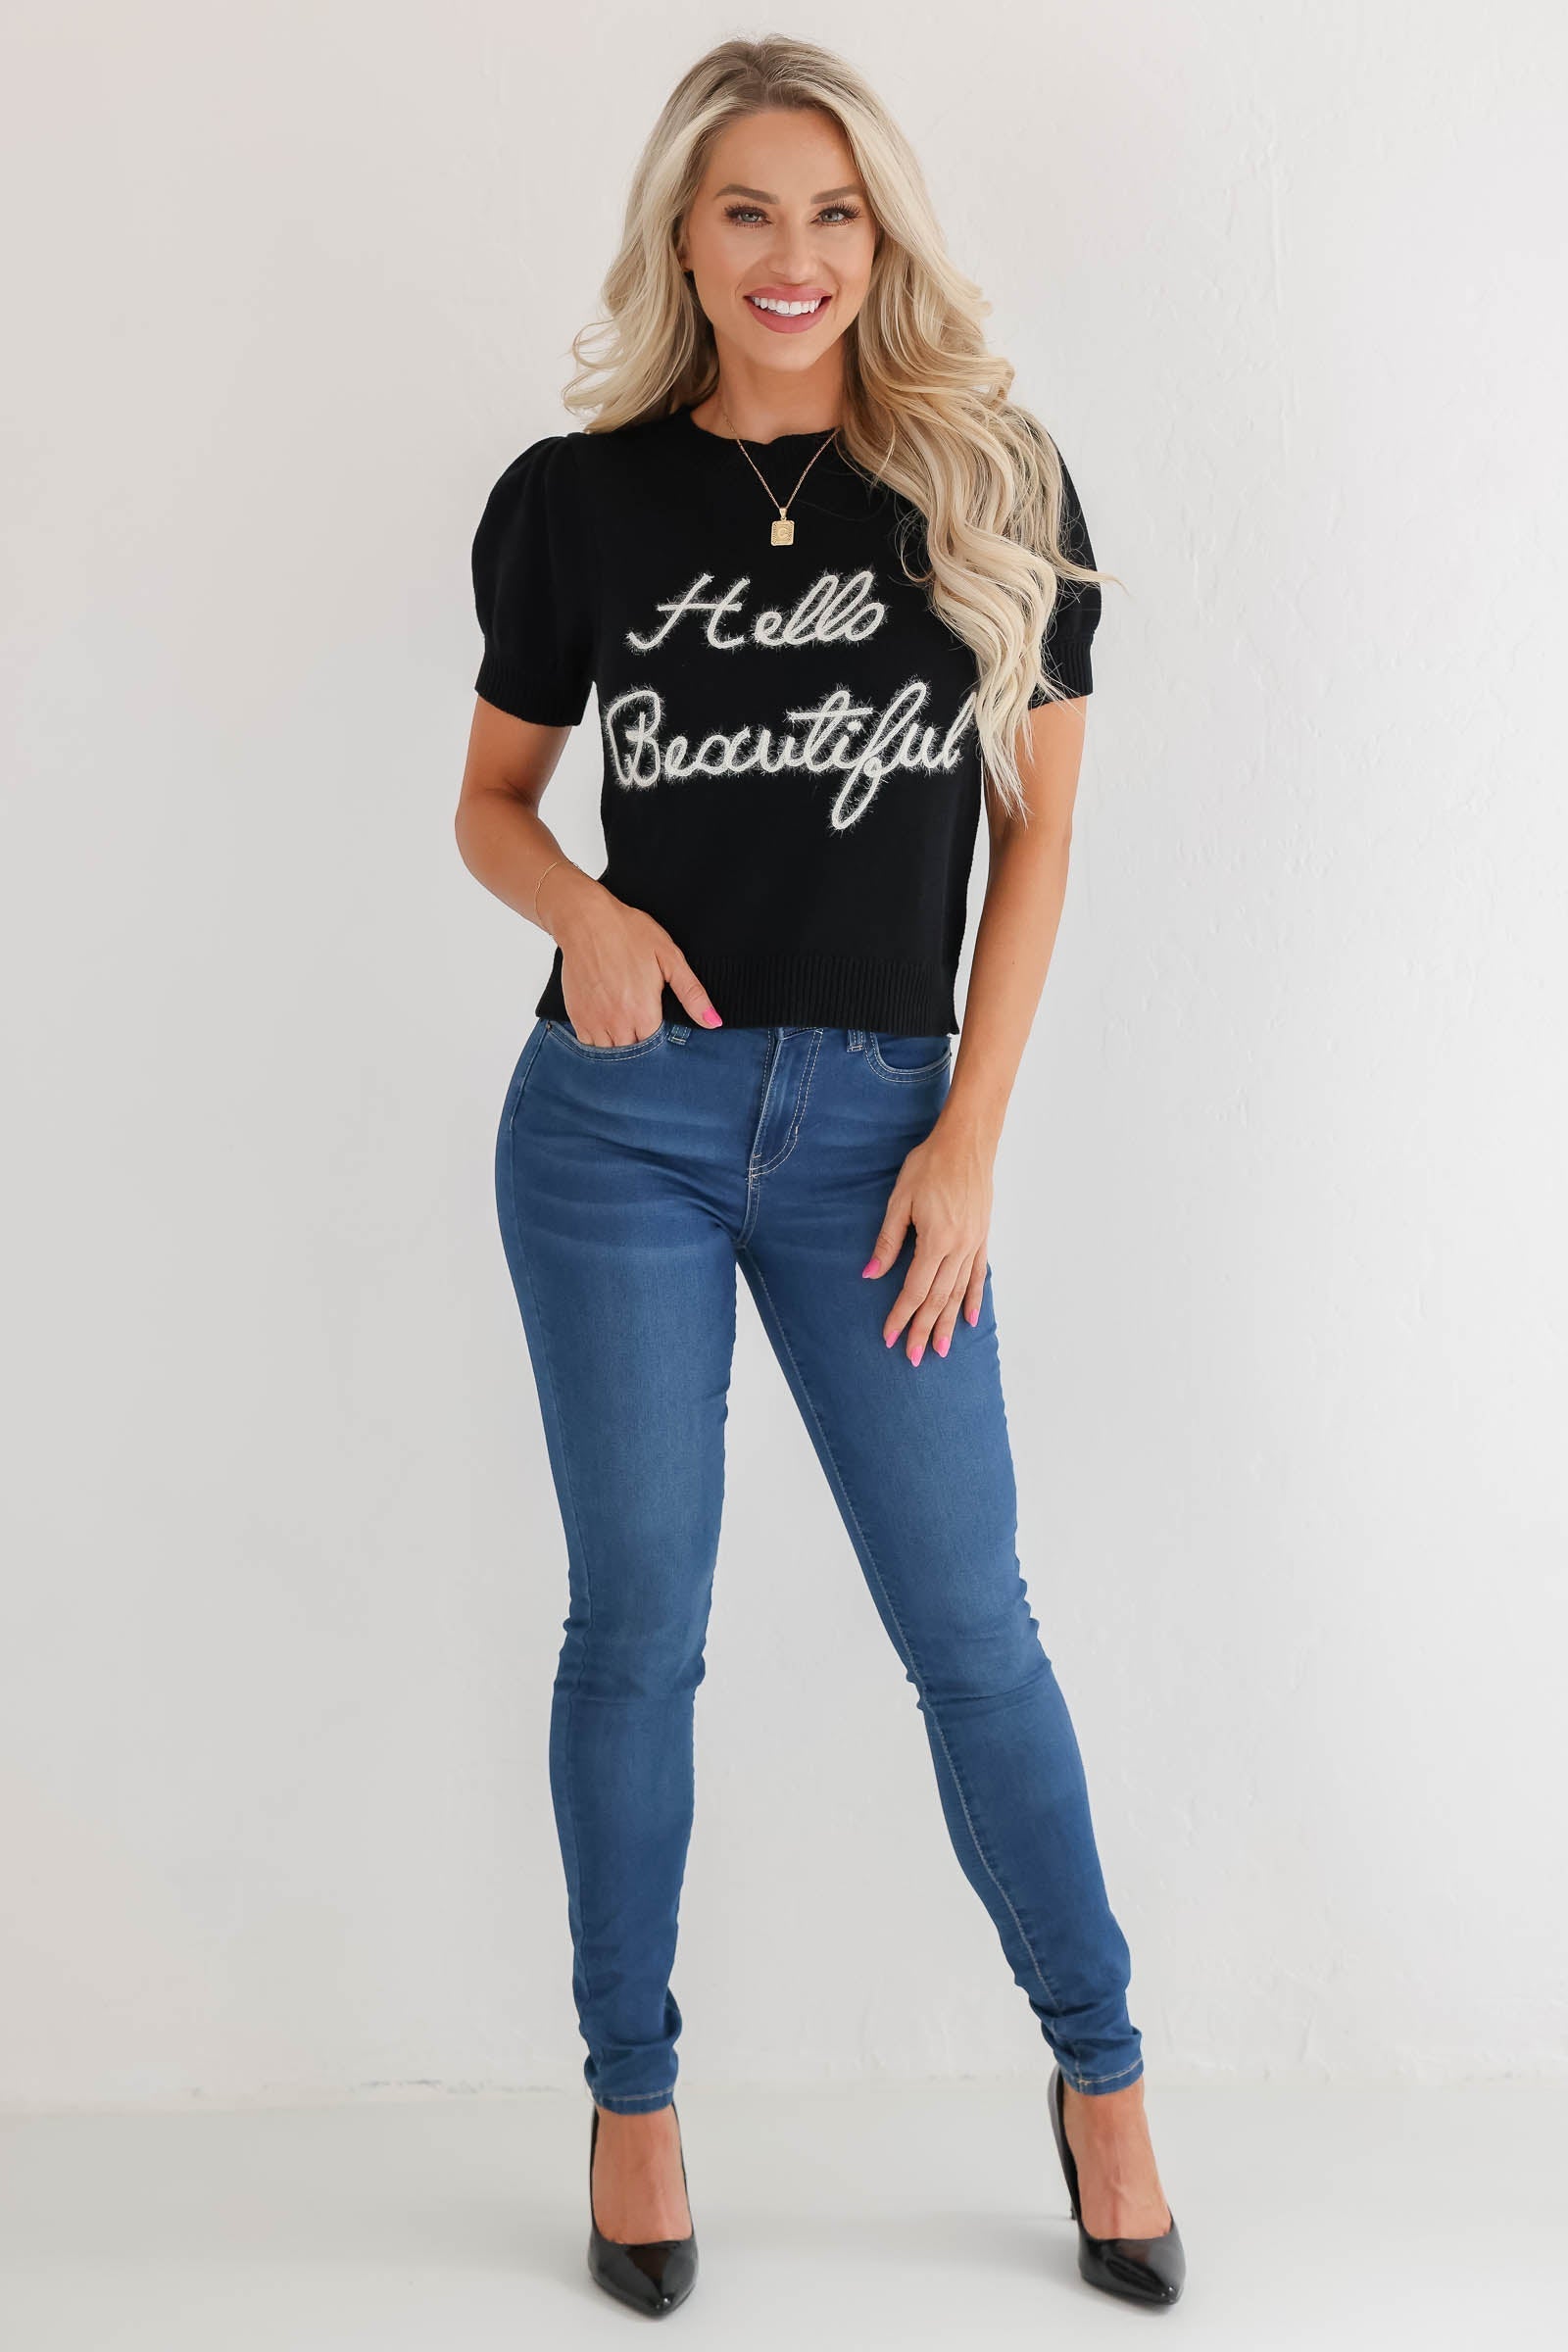 Hello Beautiful Embroidered Sweater Top - Black closet candy 1